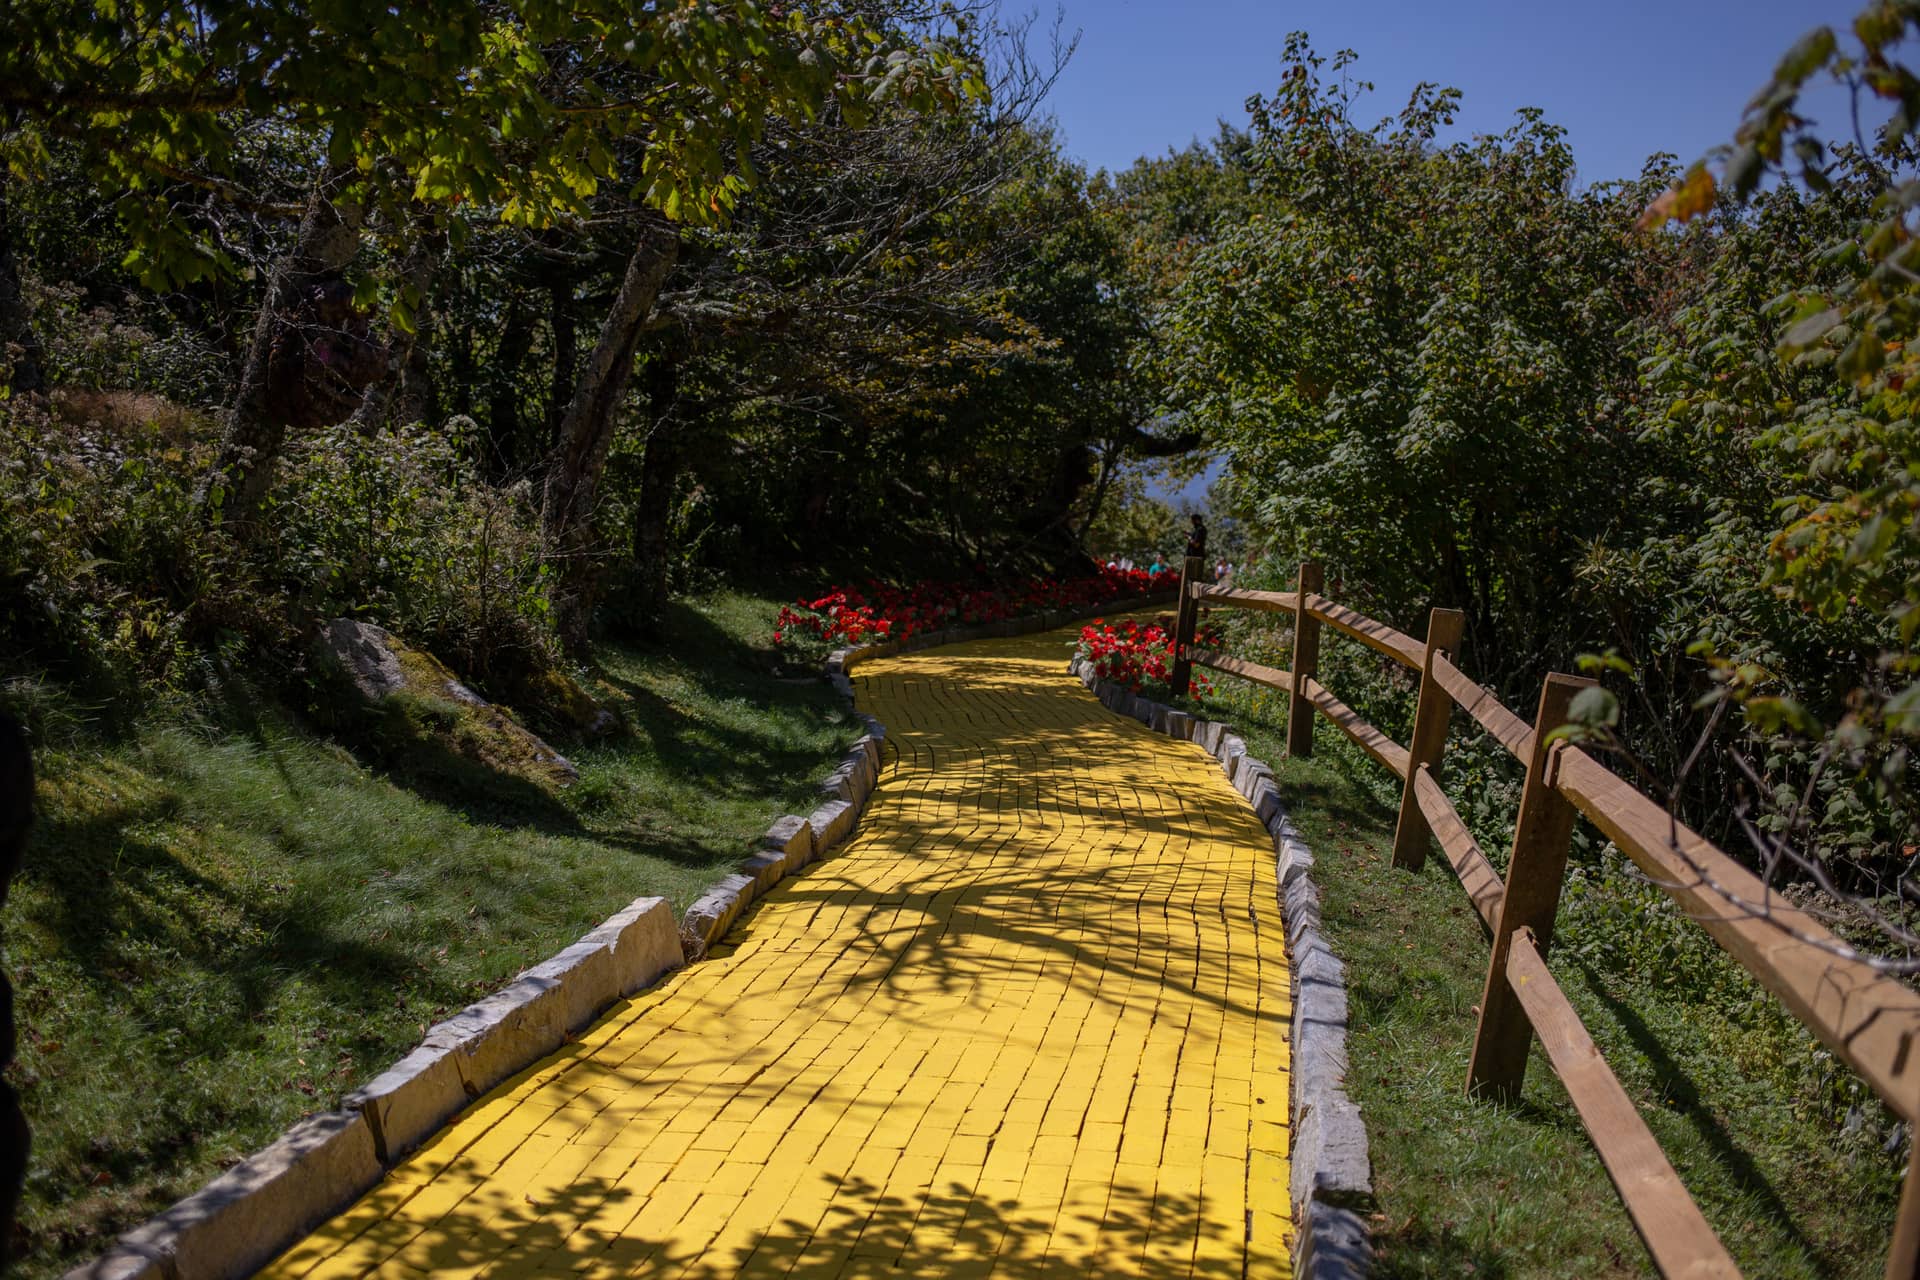 Follow the Yellow Brick Road - Our Journey to the Cloud